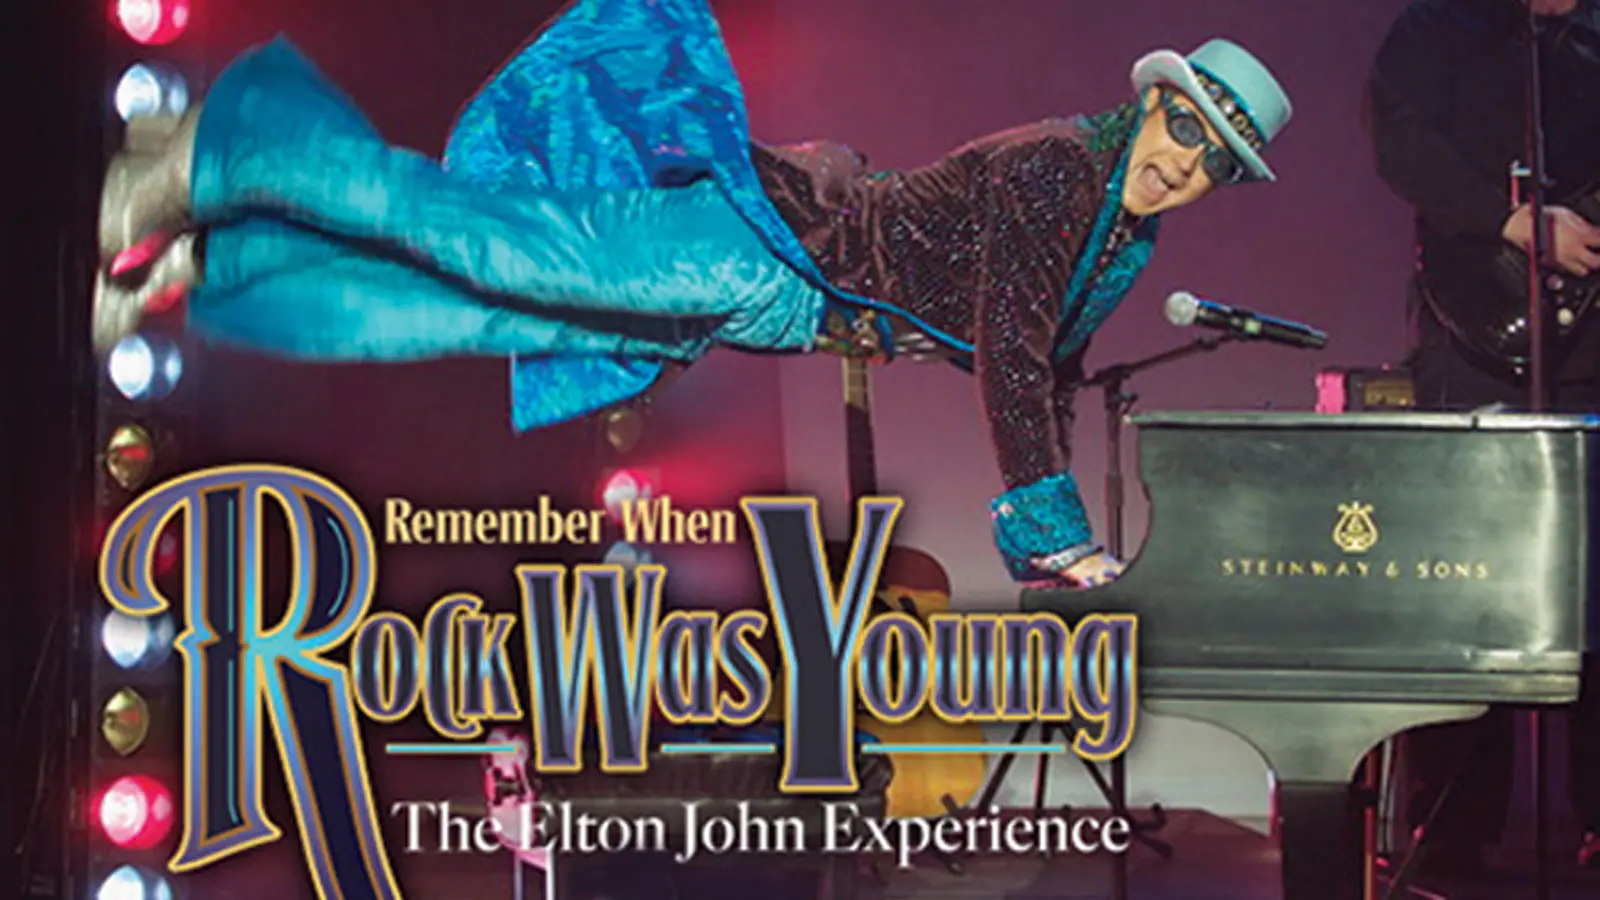 Clark Center Presents: Remember When Rock Was Young - The Elton John Experience